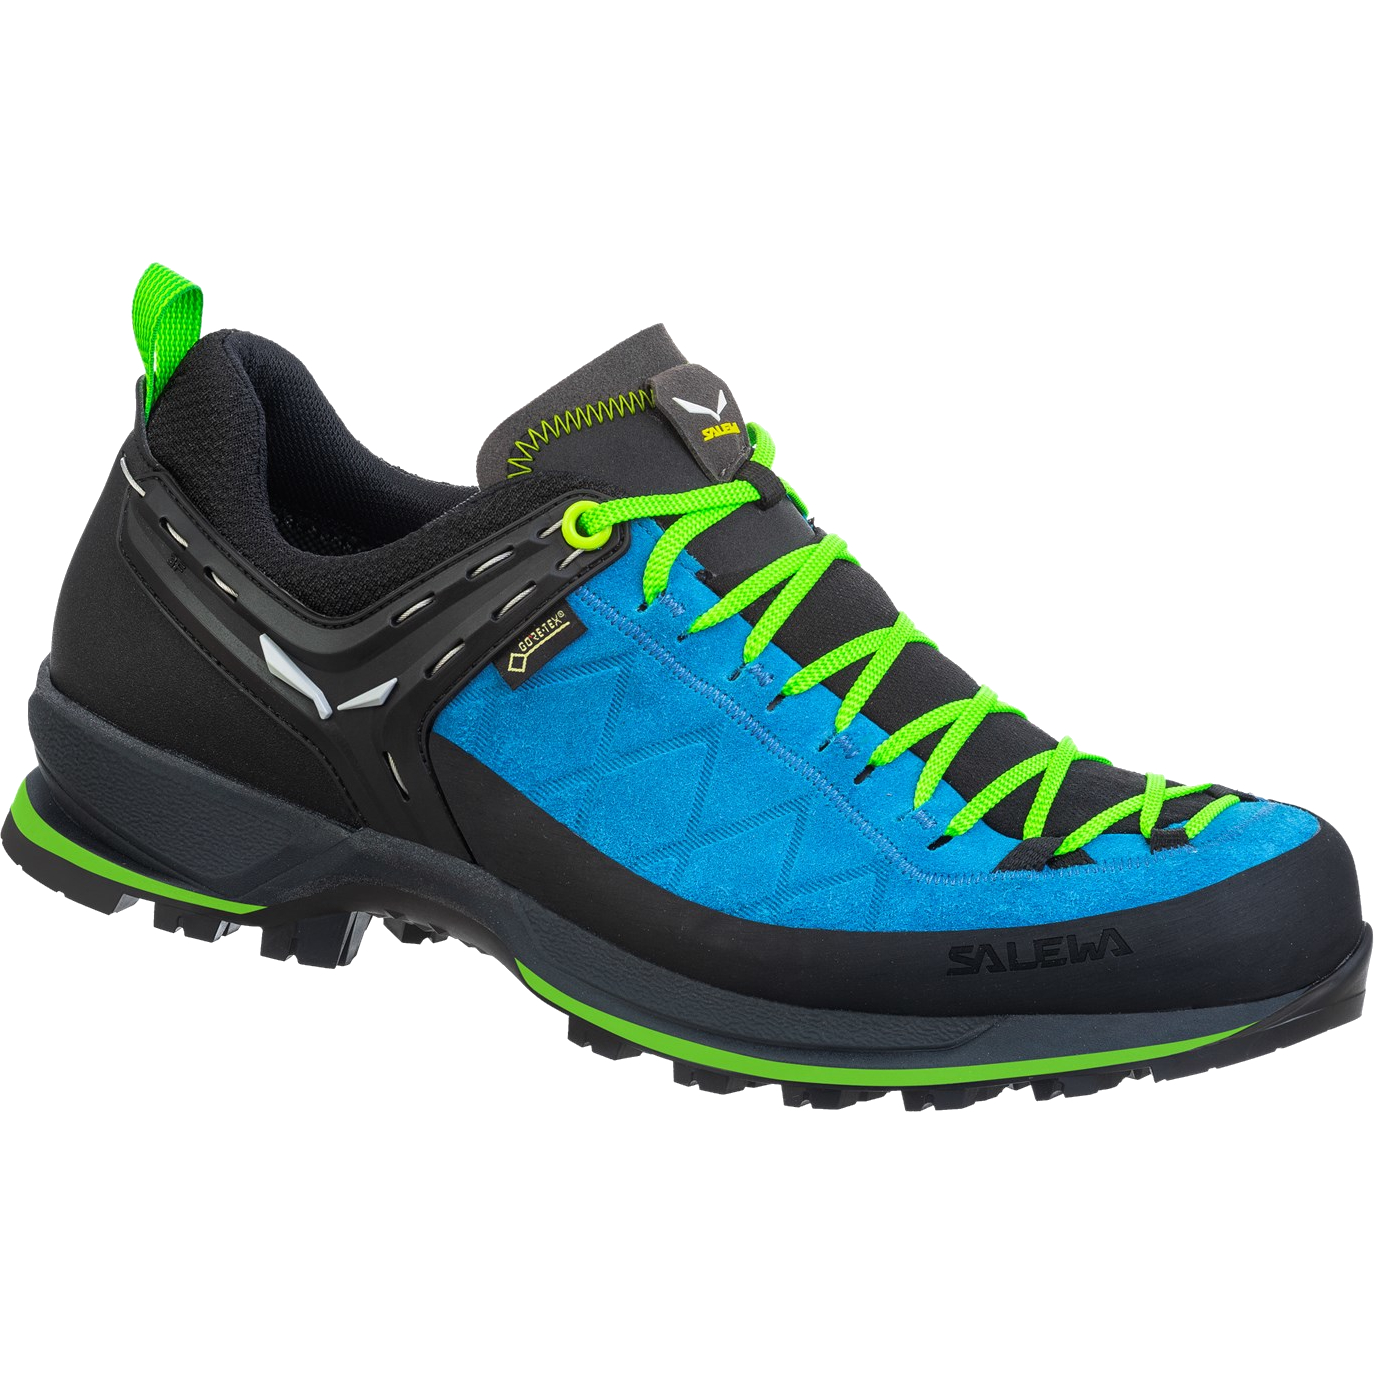 Picture of Salewa Mountain Trainer 2 GTX Hiking Shoes - blue danube/fluo green 8375